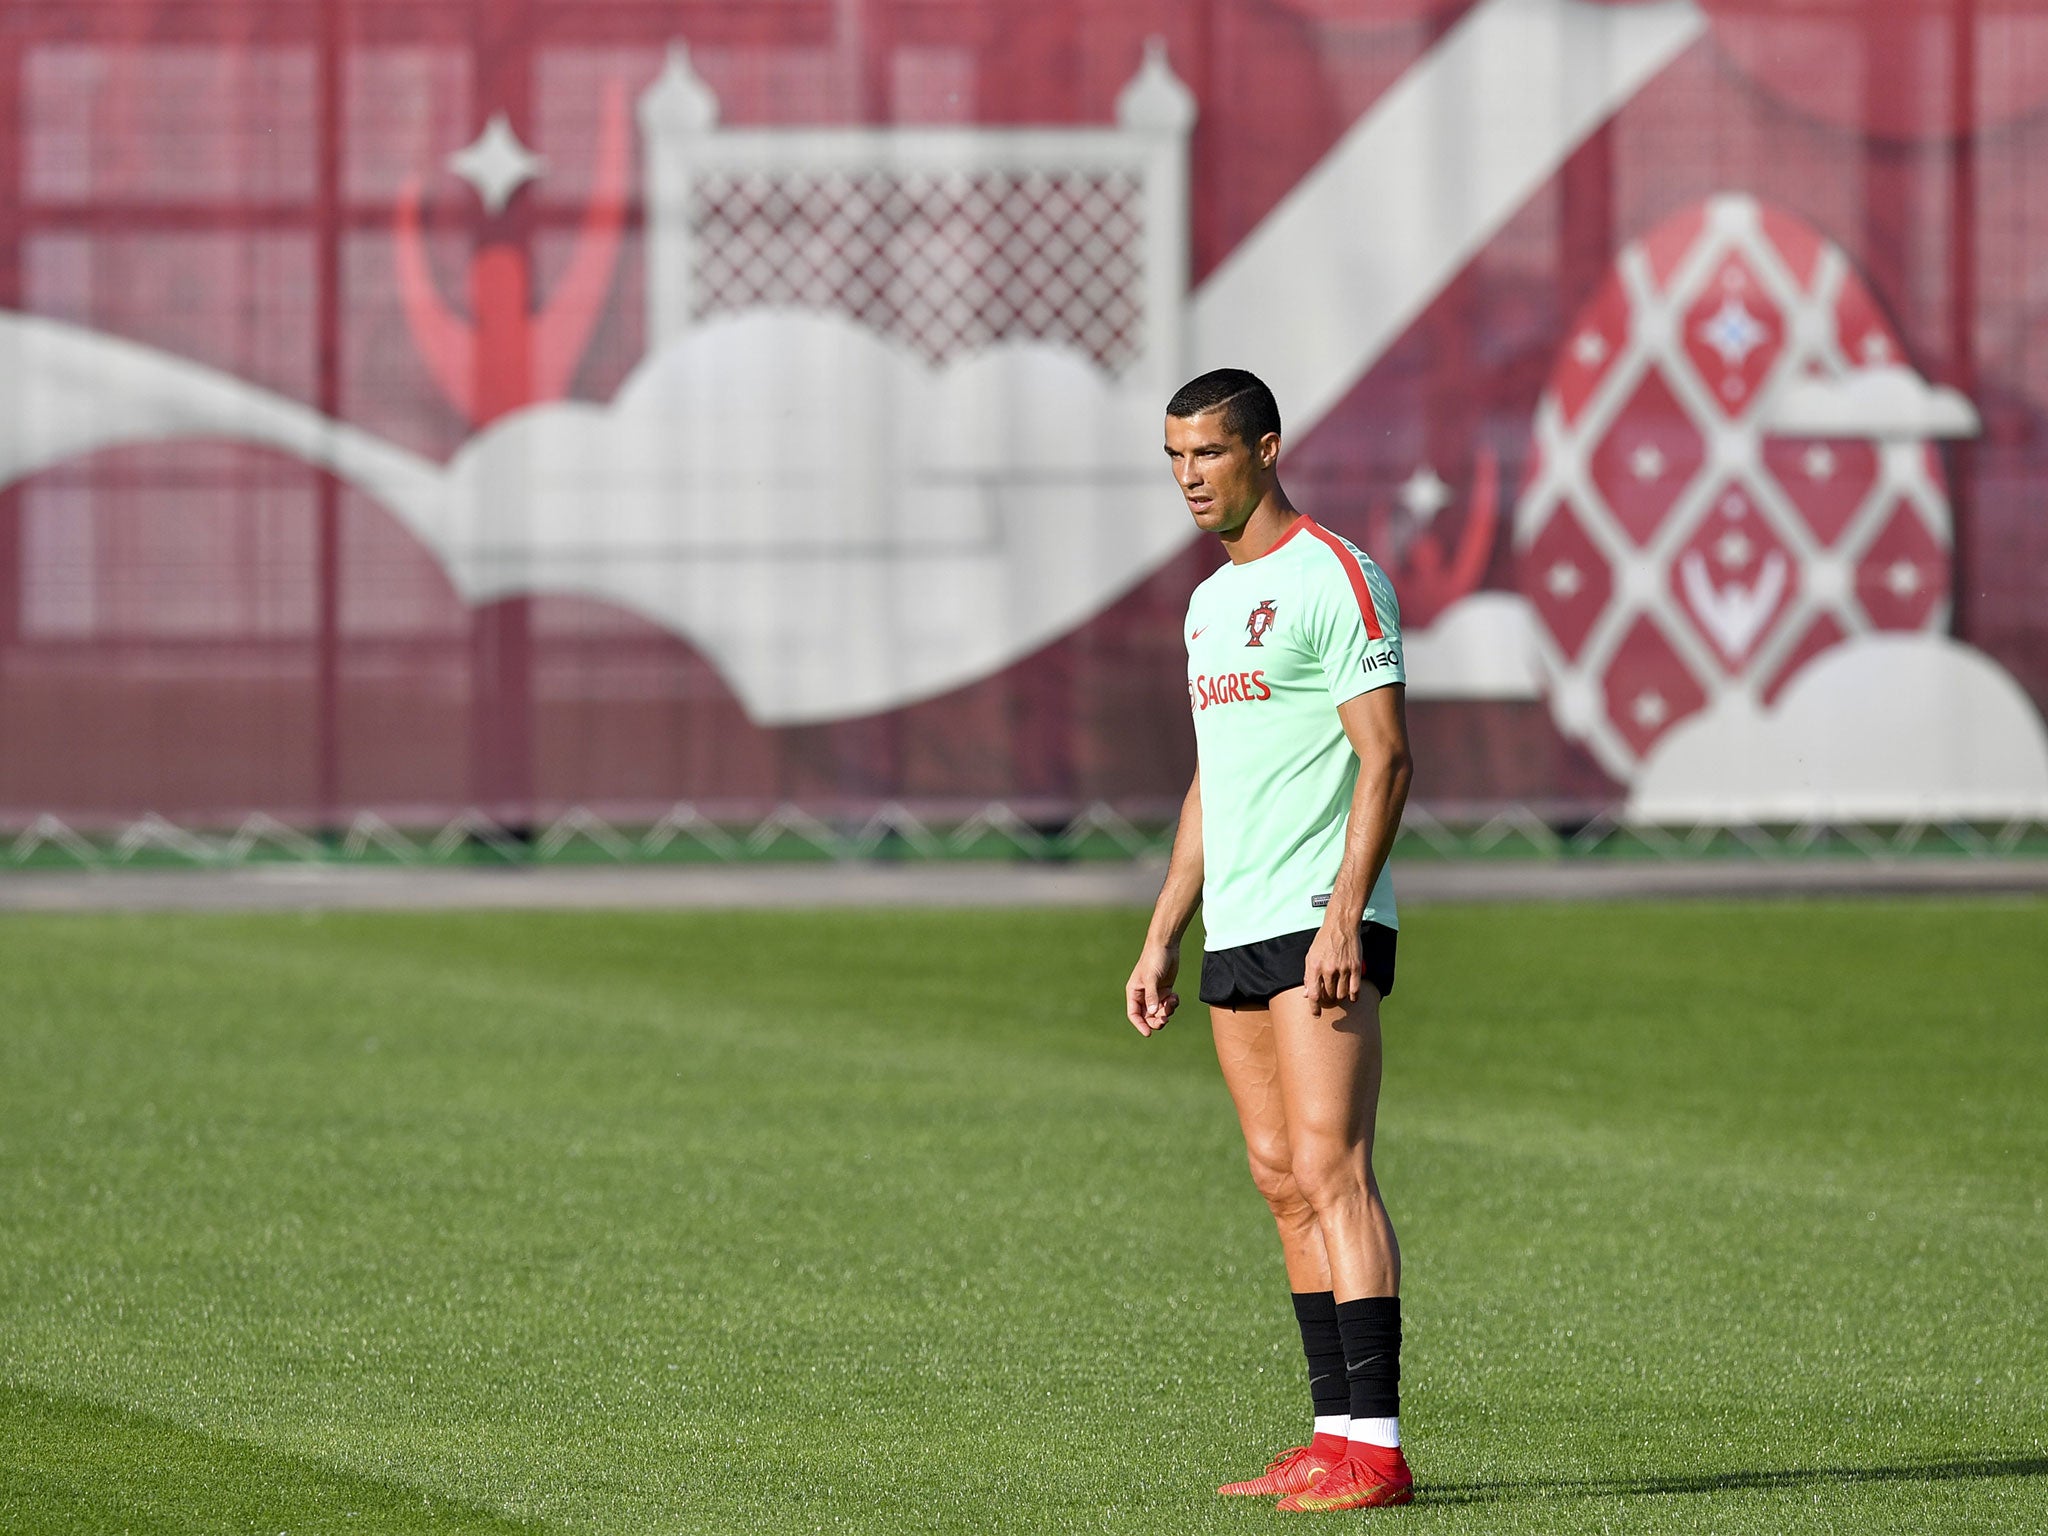 Cristiano Ronaldo is currently on duty with Portugal for the Confederations Cup in Russia